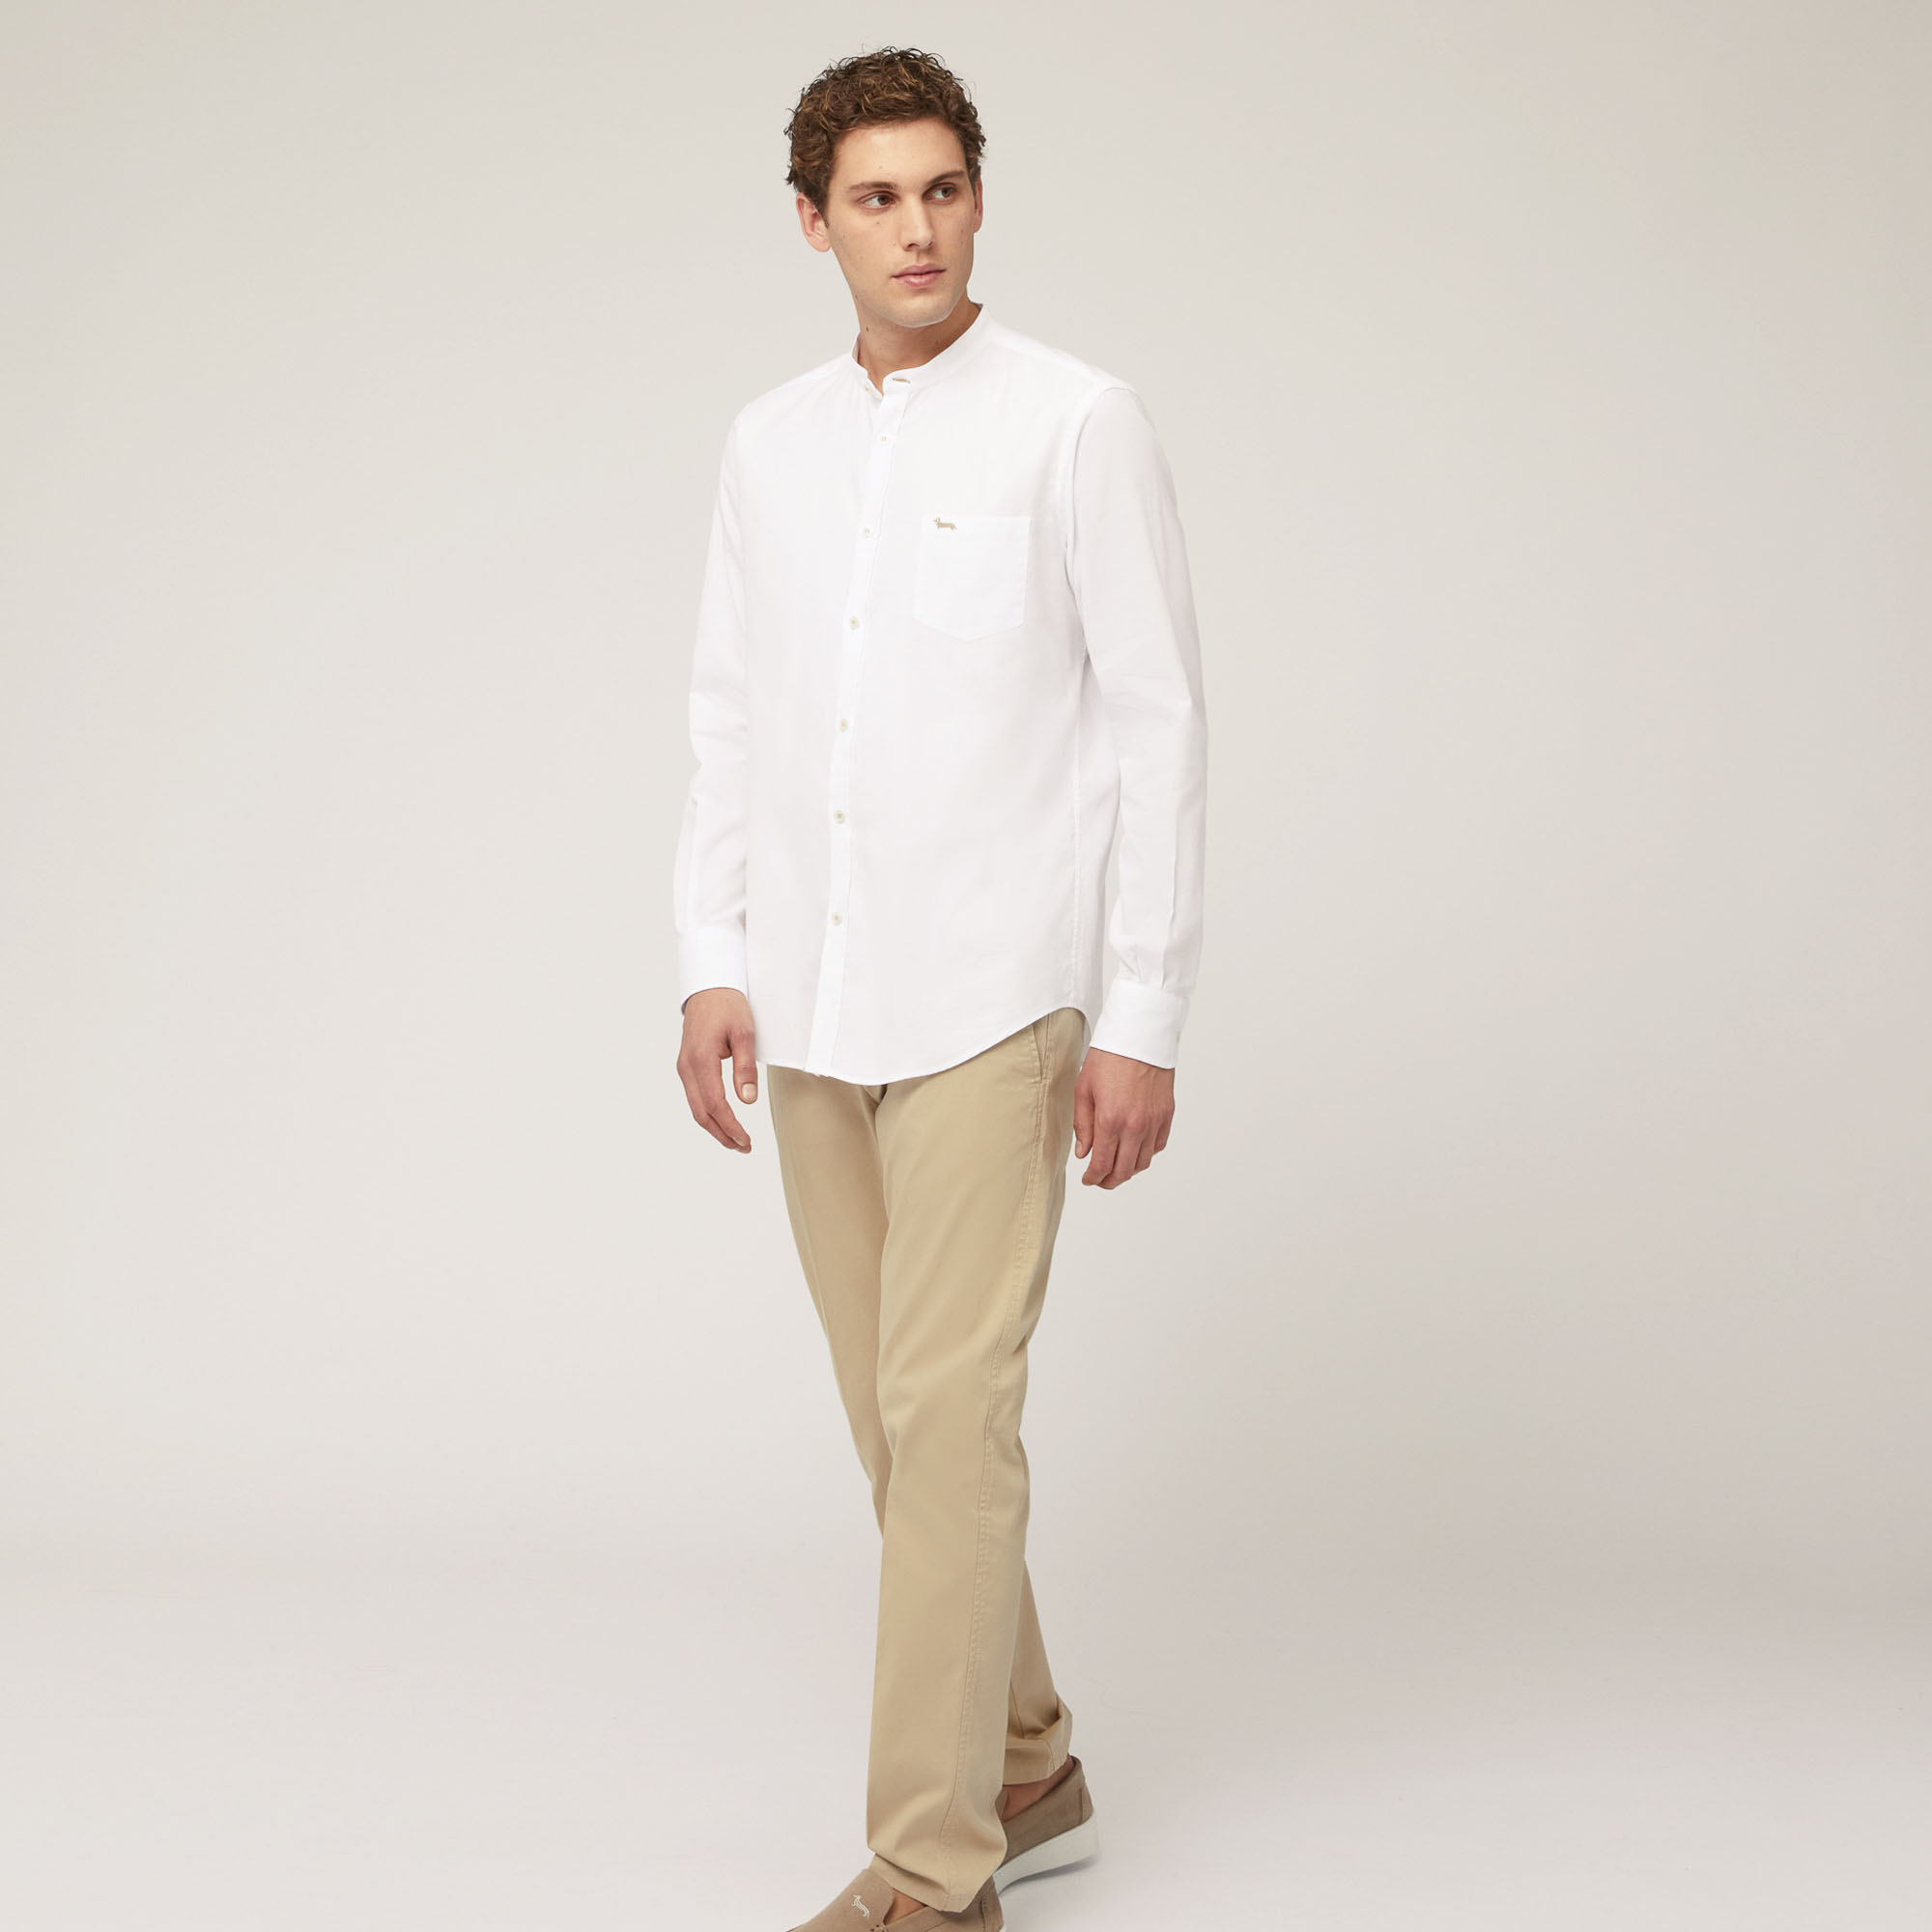 Woven Cotton Shirt with Mandarin Collar and Breast Pocket, White, large image number 3